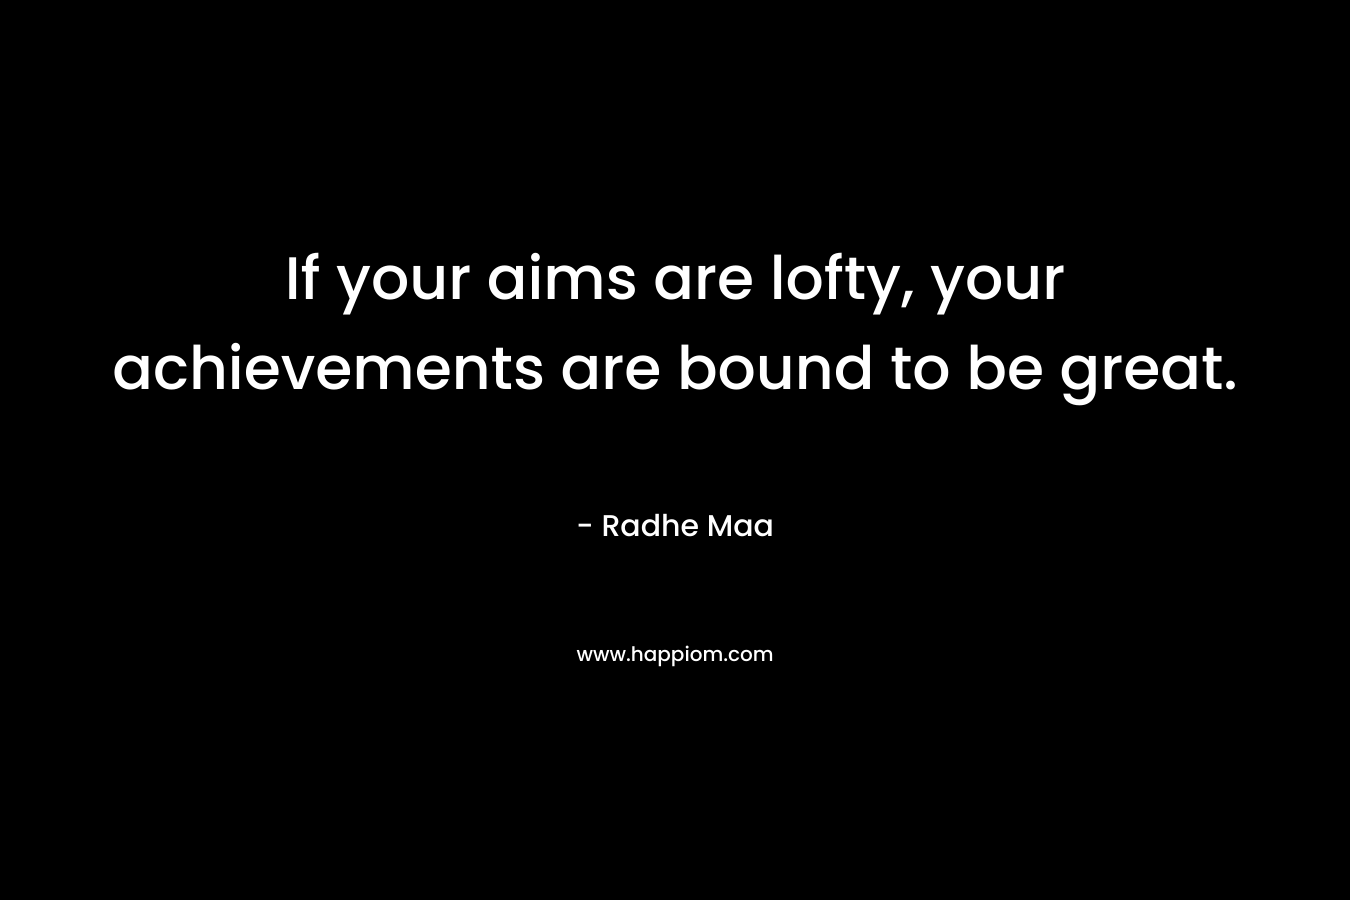 If your aims are lofty, your achievements are bound to be great.